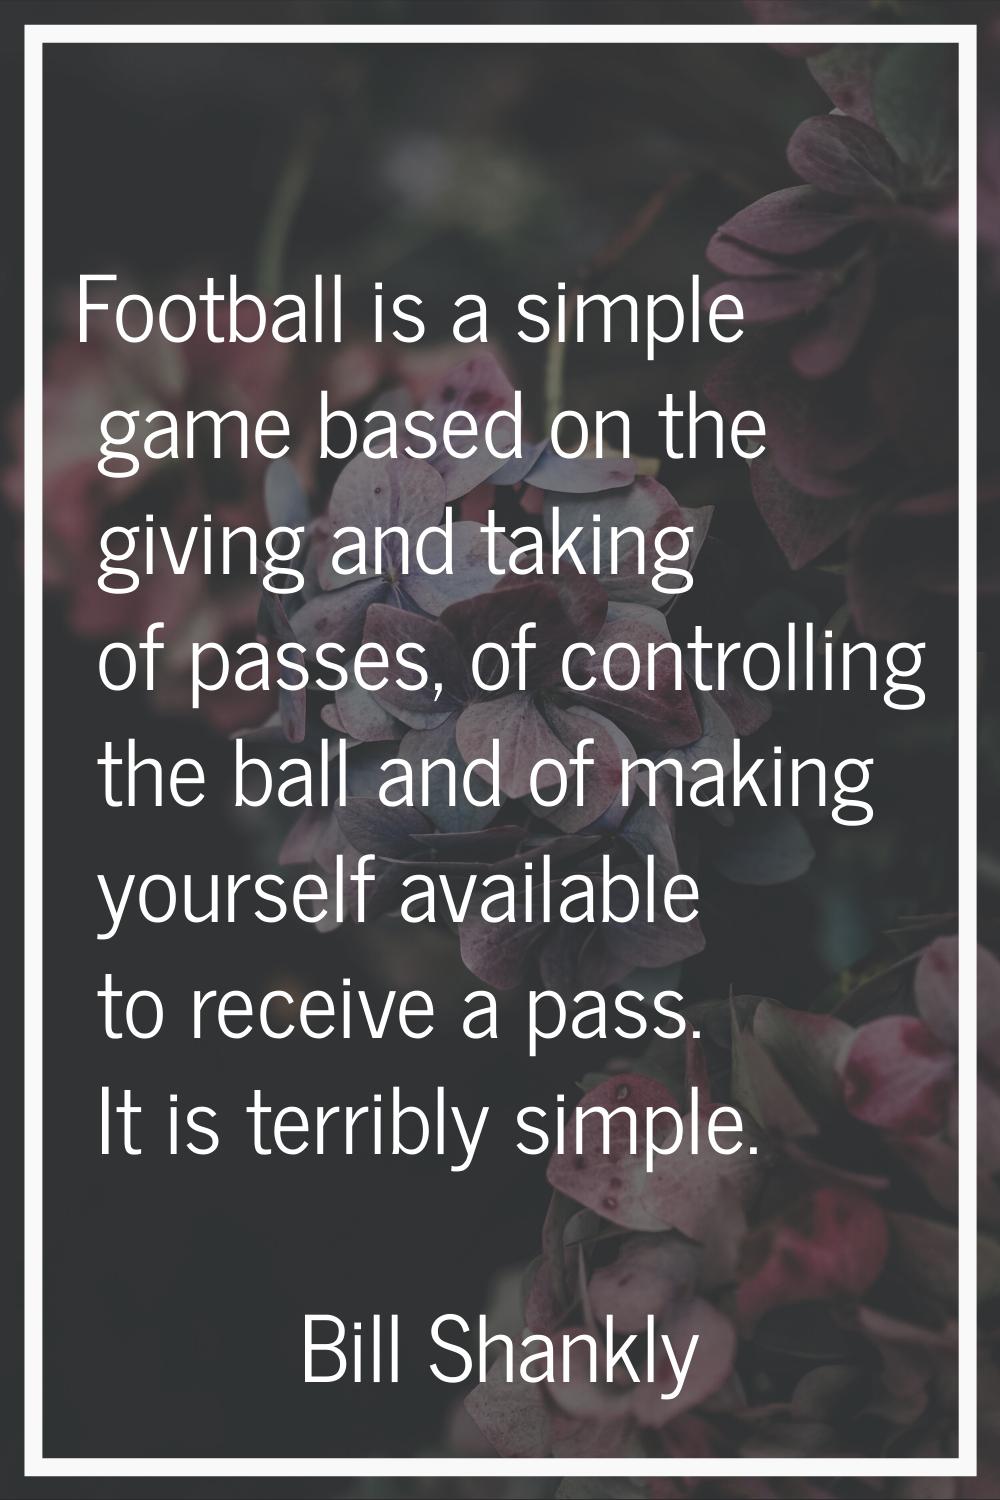 Football is a simple game based on the giving and taking of passes, of controlling the ball and of 